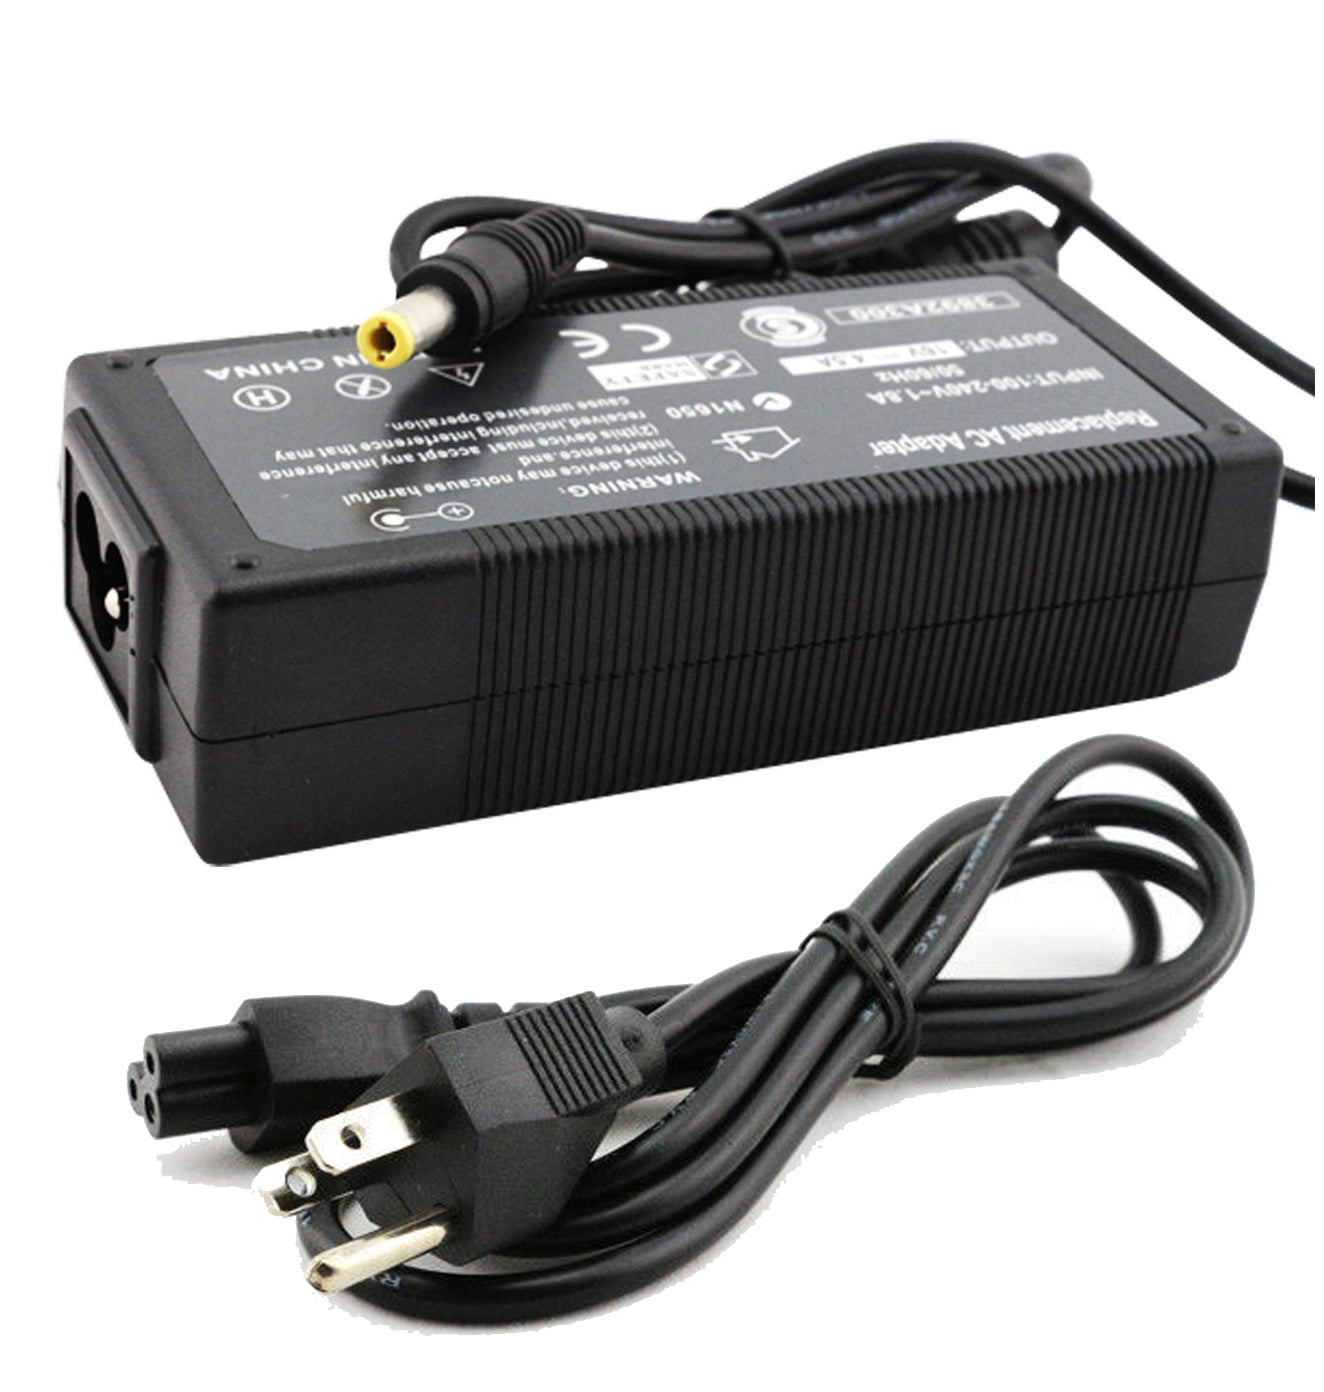 AC Adapter Charger for IBM ThinkPad R31 Notebook.